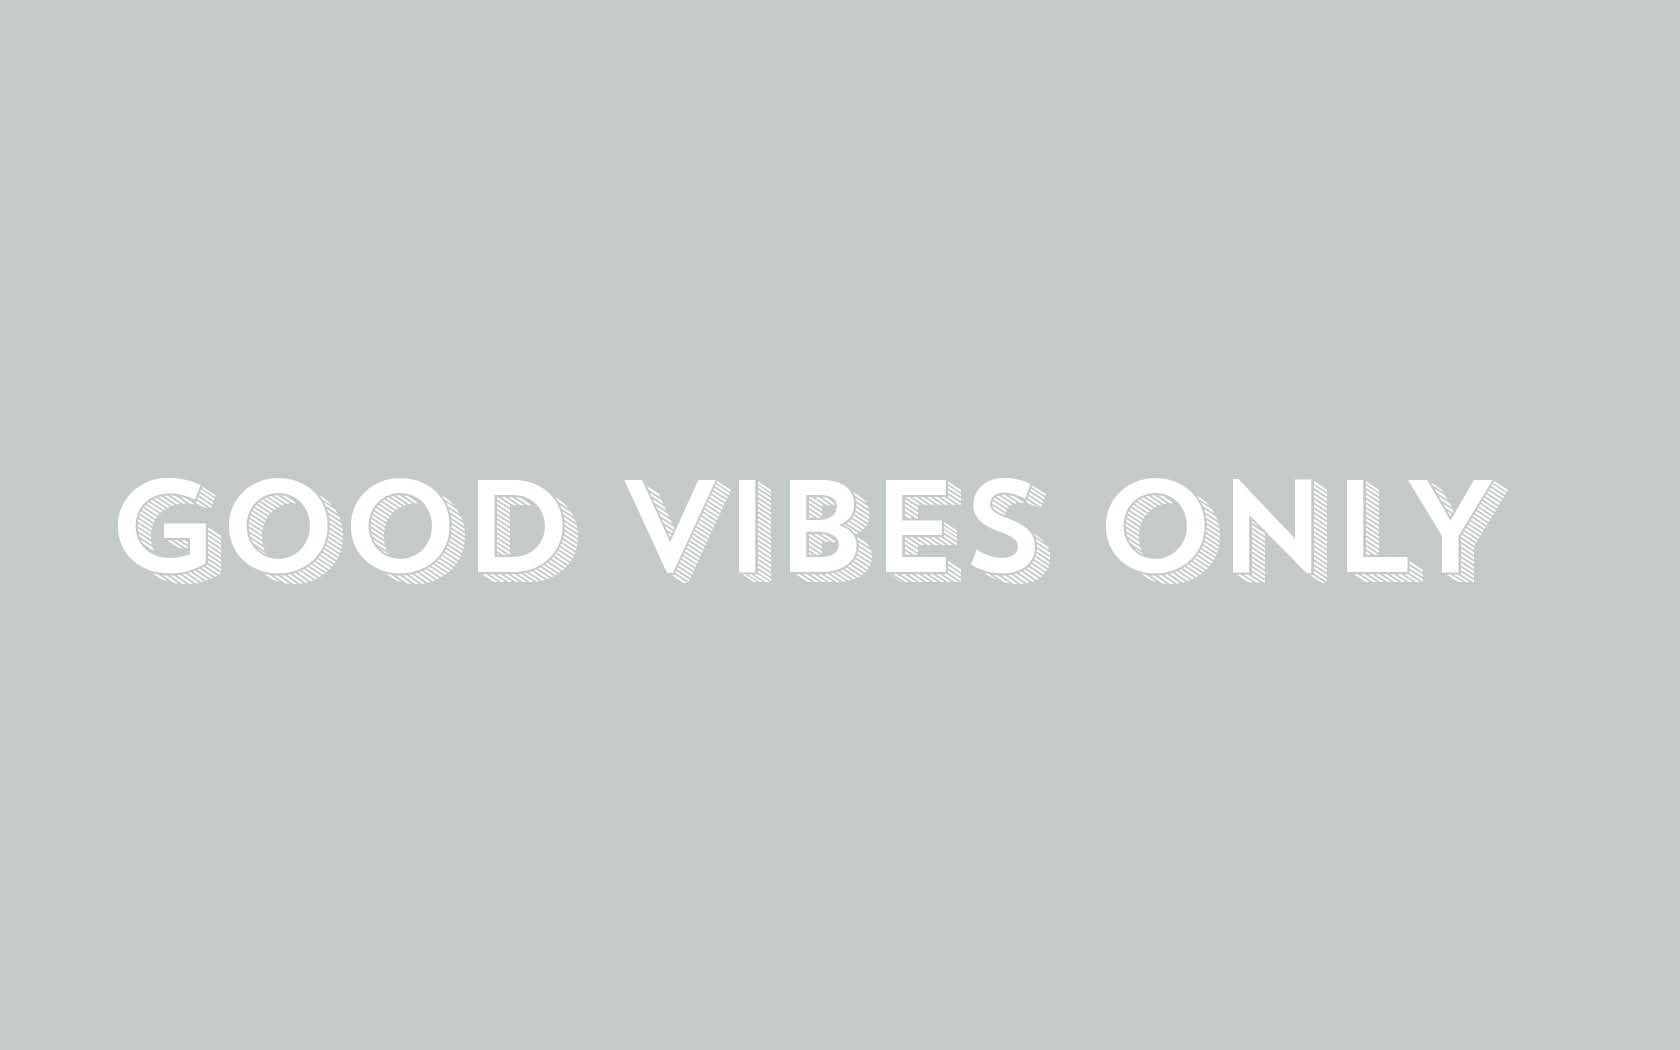 Minimal Grey white Good Vibes only desktop wallpaper background. Good vibes wallpaper, Good vibes only, Life quotes wallpaper